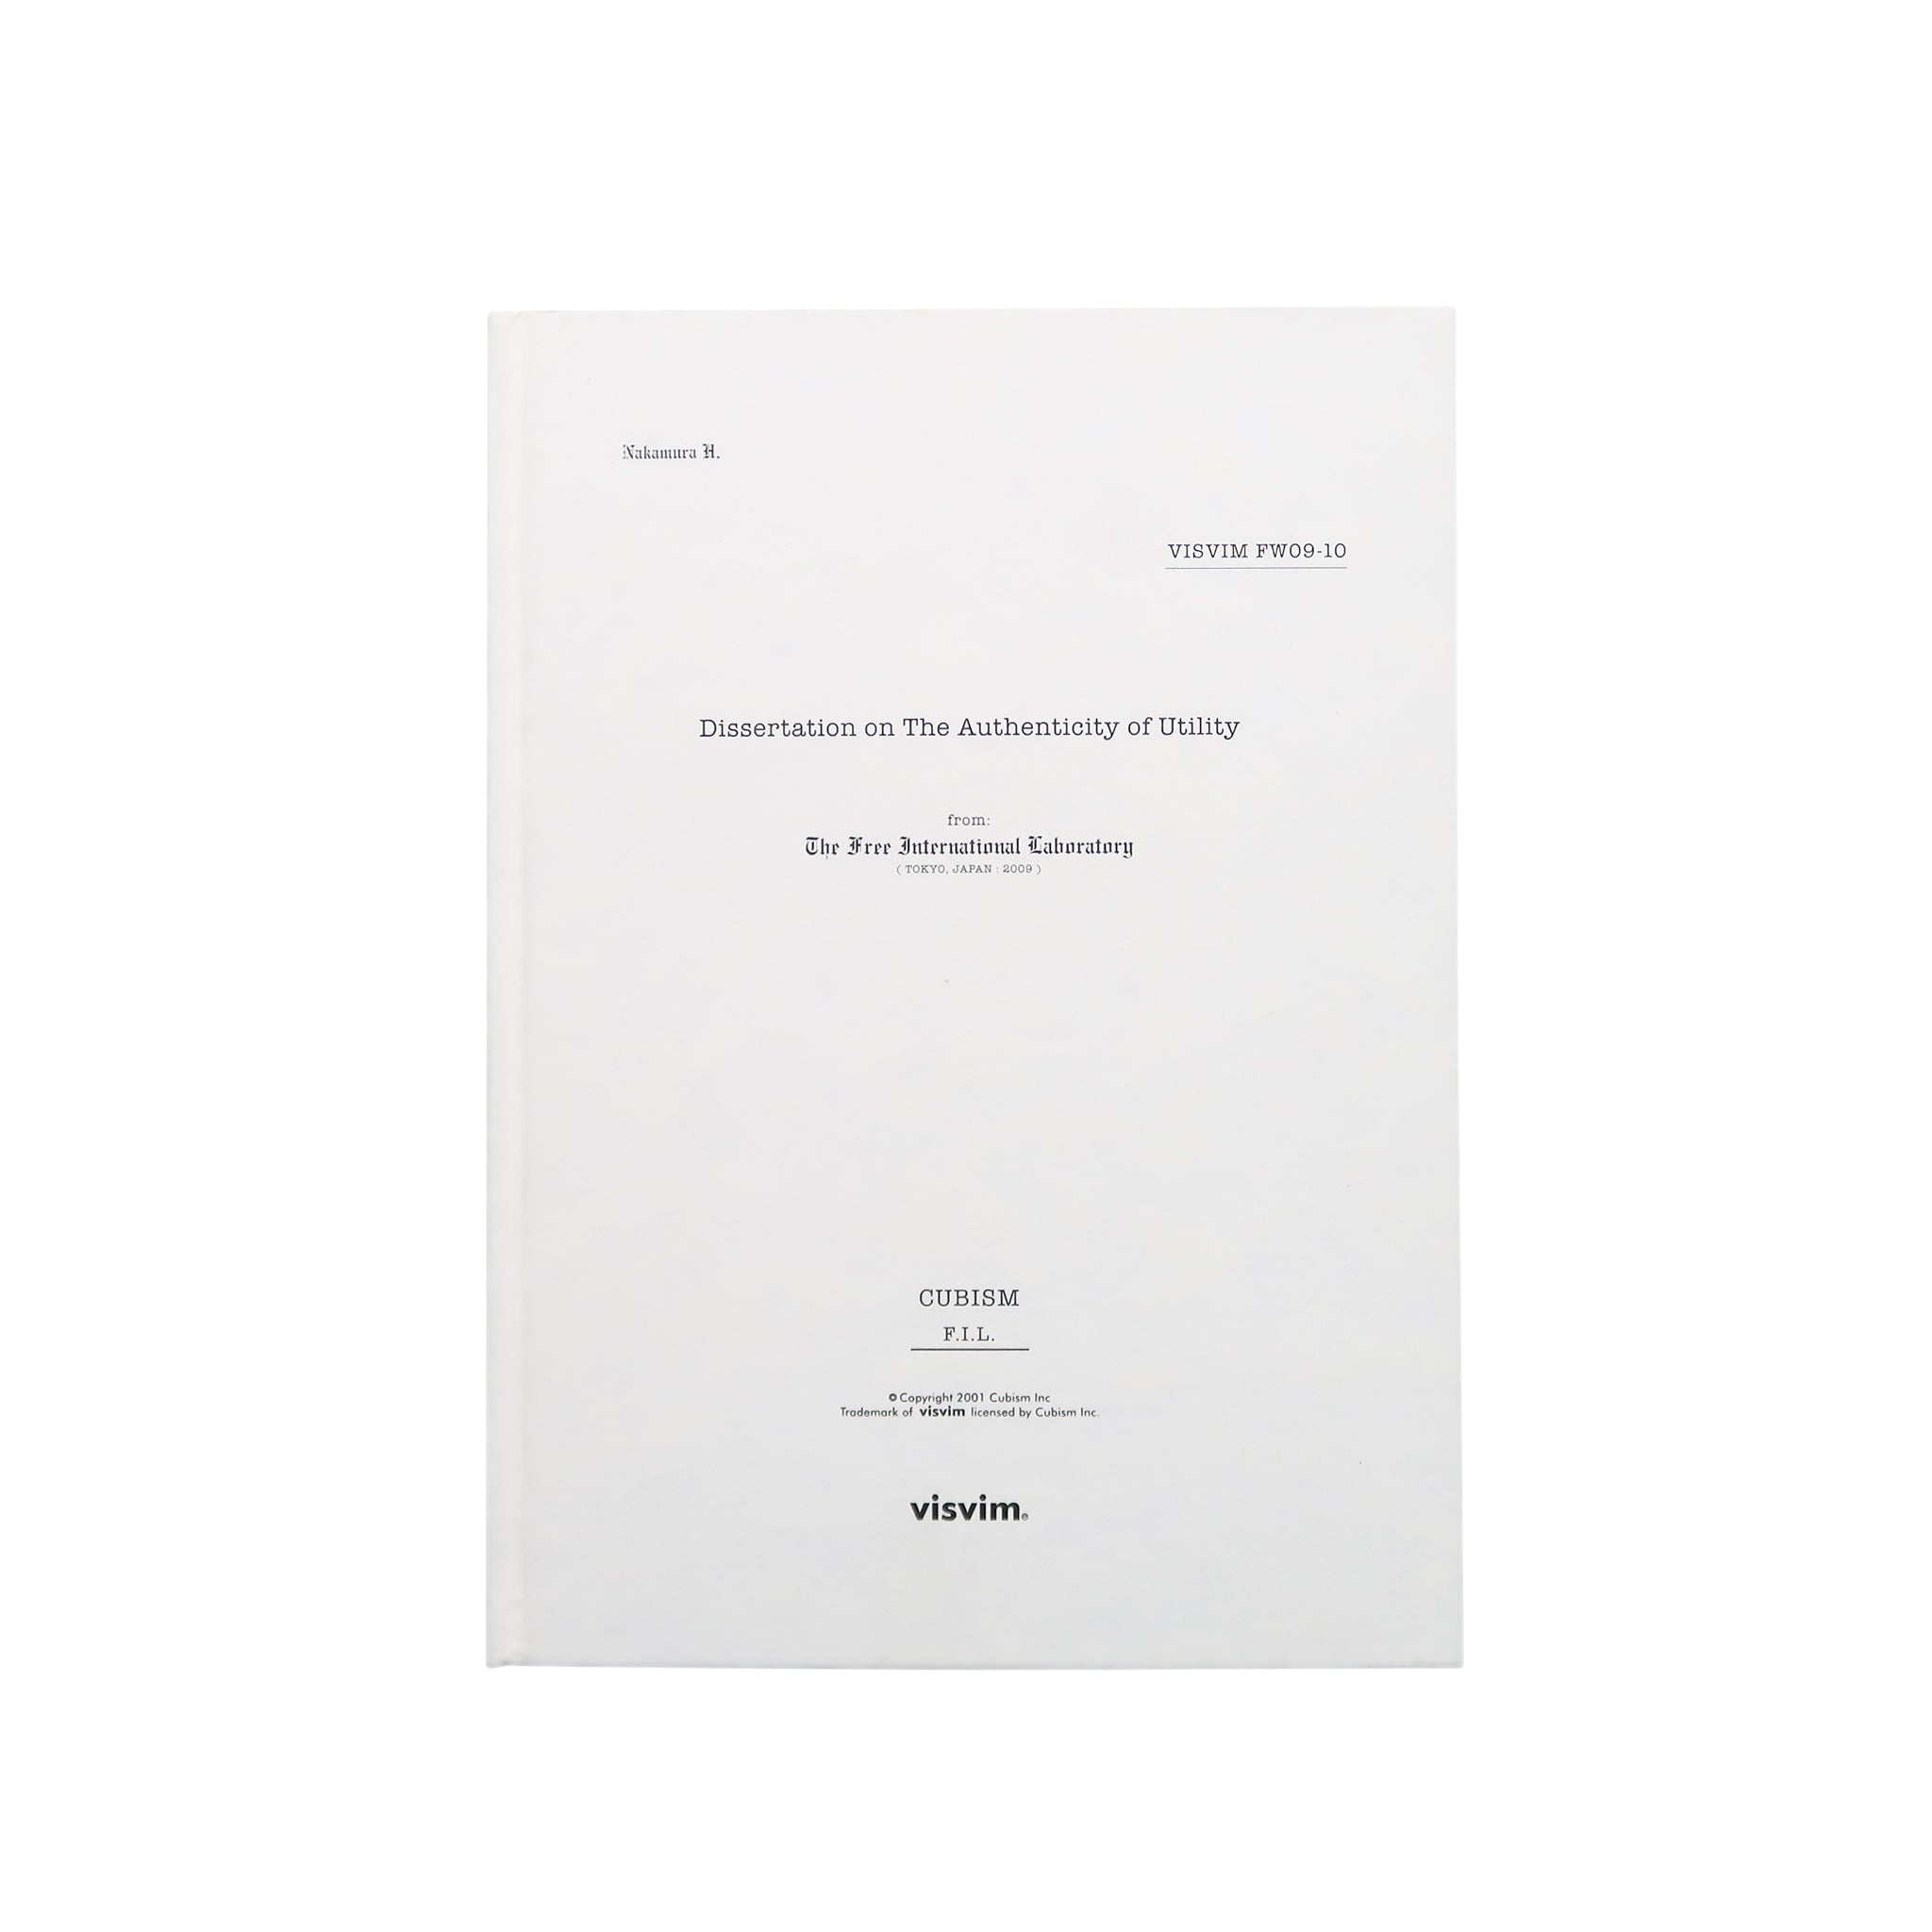 Dissertation On The Authenticity Of Utility (FW09-10)